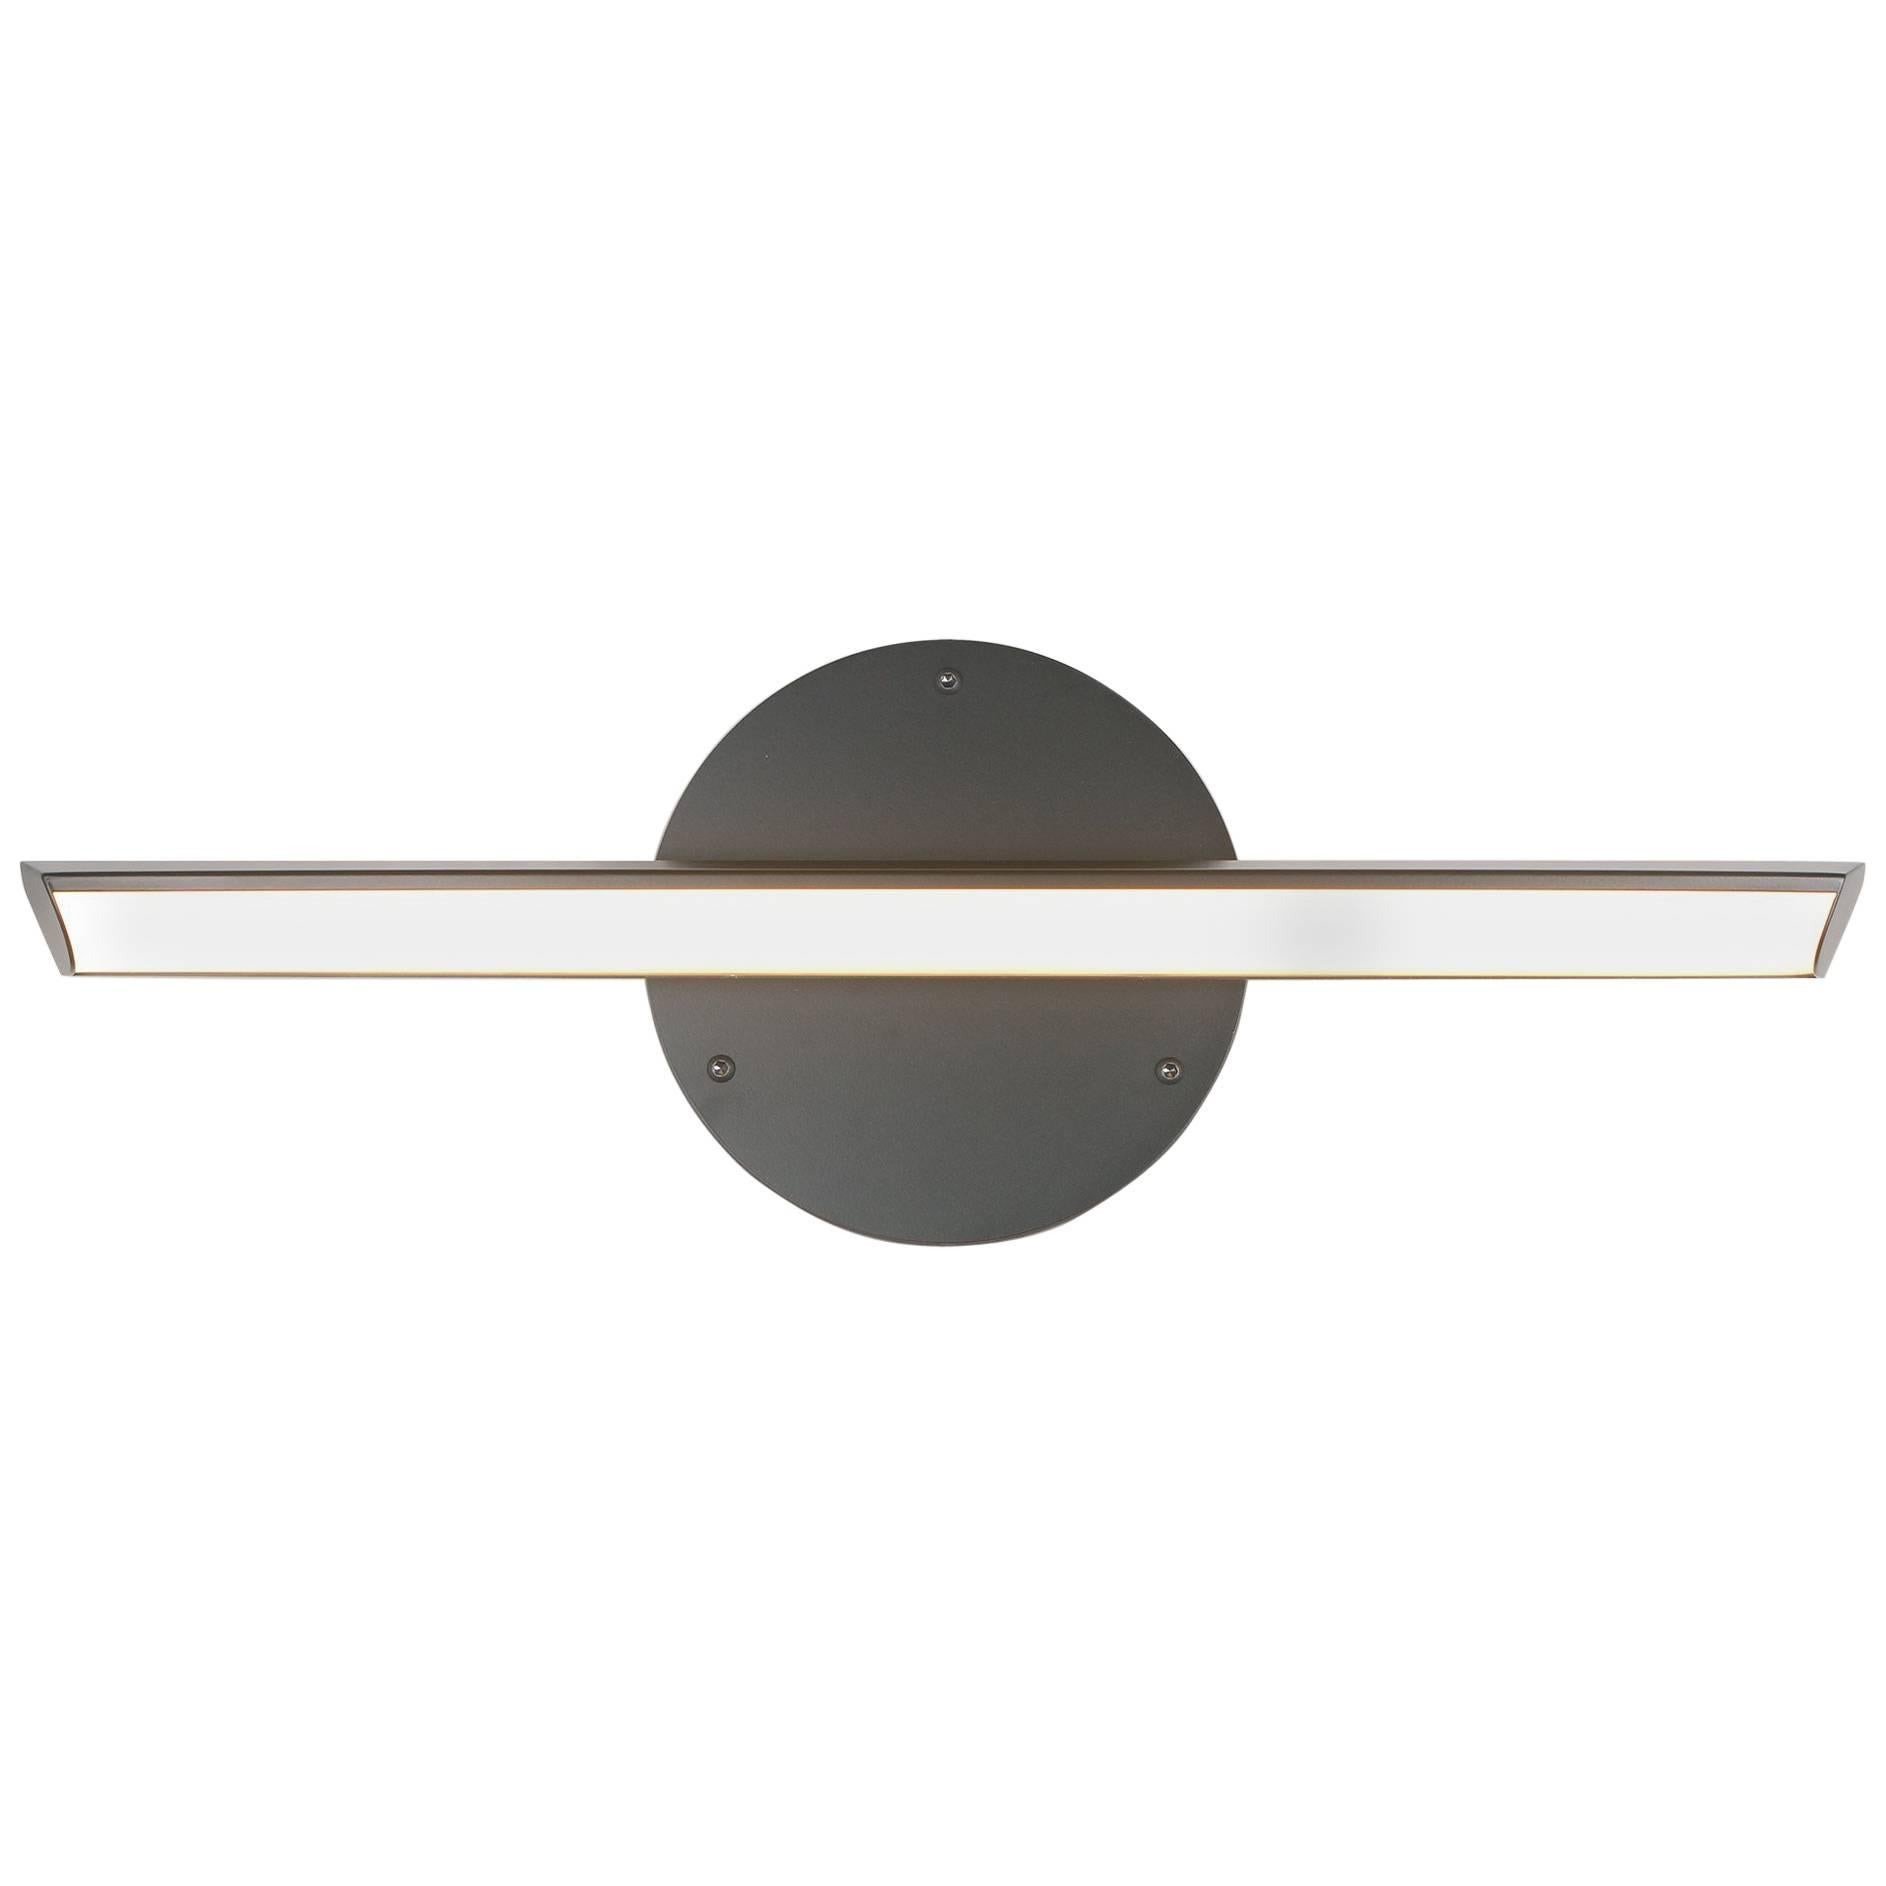 CHIME SOLO is inspired by the harmonious sound of a resonating bell. CHIME SOLO softly illuminates with a single horizontal bar of soft warm light. Available in two sizes, perfect for a vanity or hallway.

METAL FINISH
Powder-coat finish available